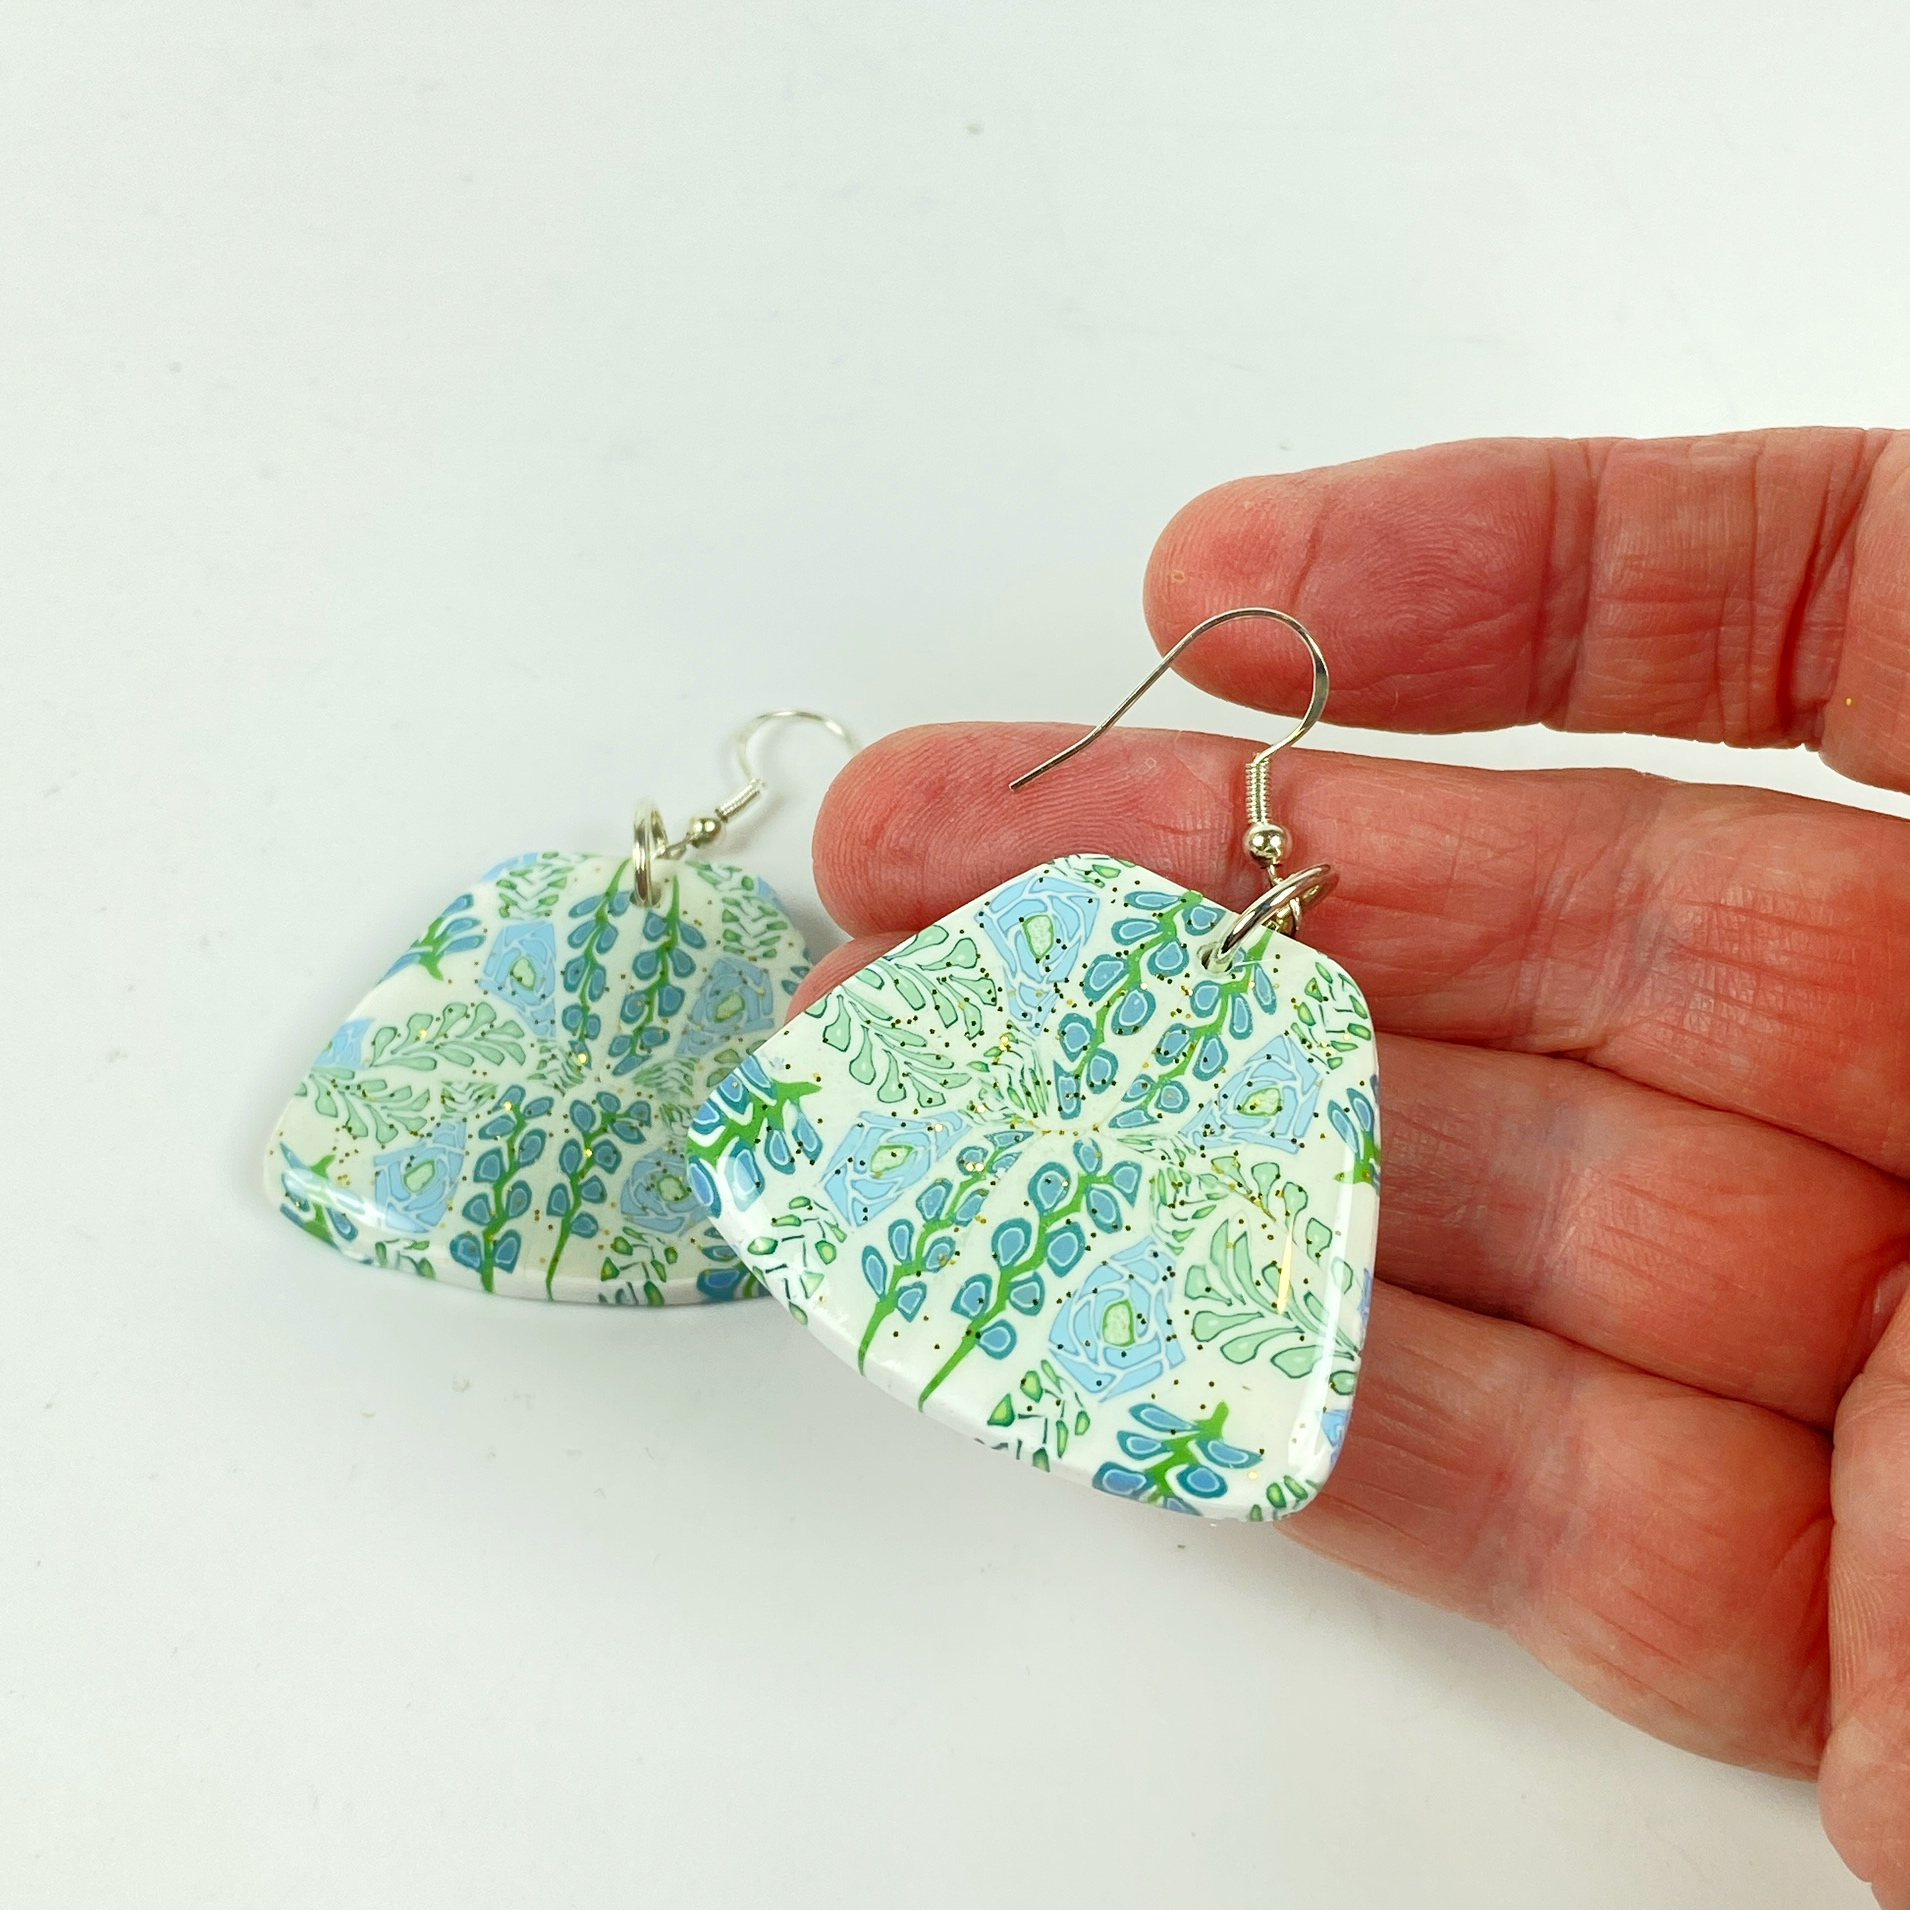 Blue Blossom Handmade Polymer Clay Trapezoid Earrings handheld for size reference